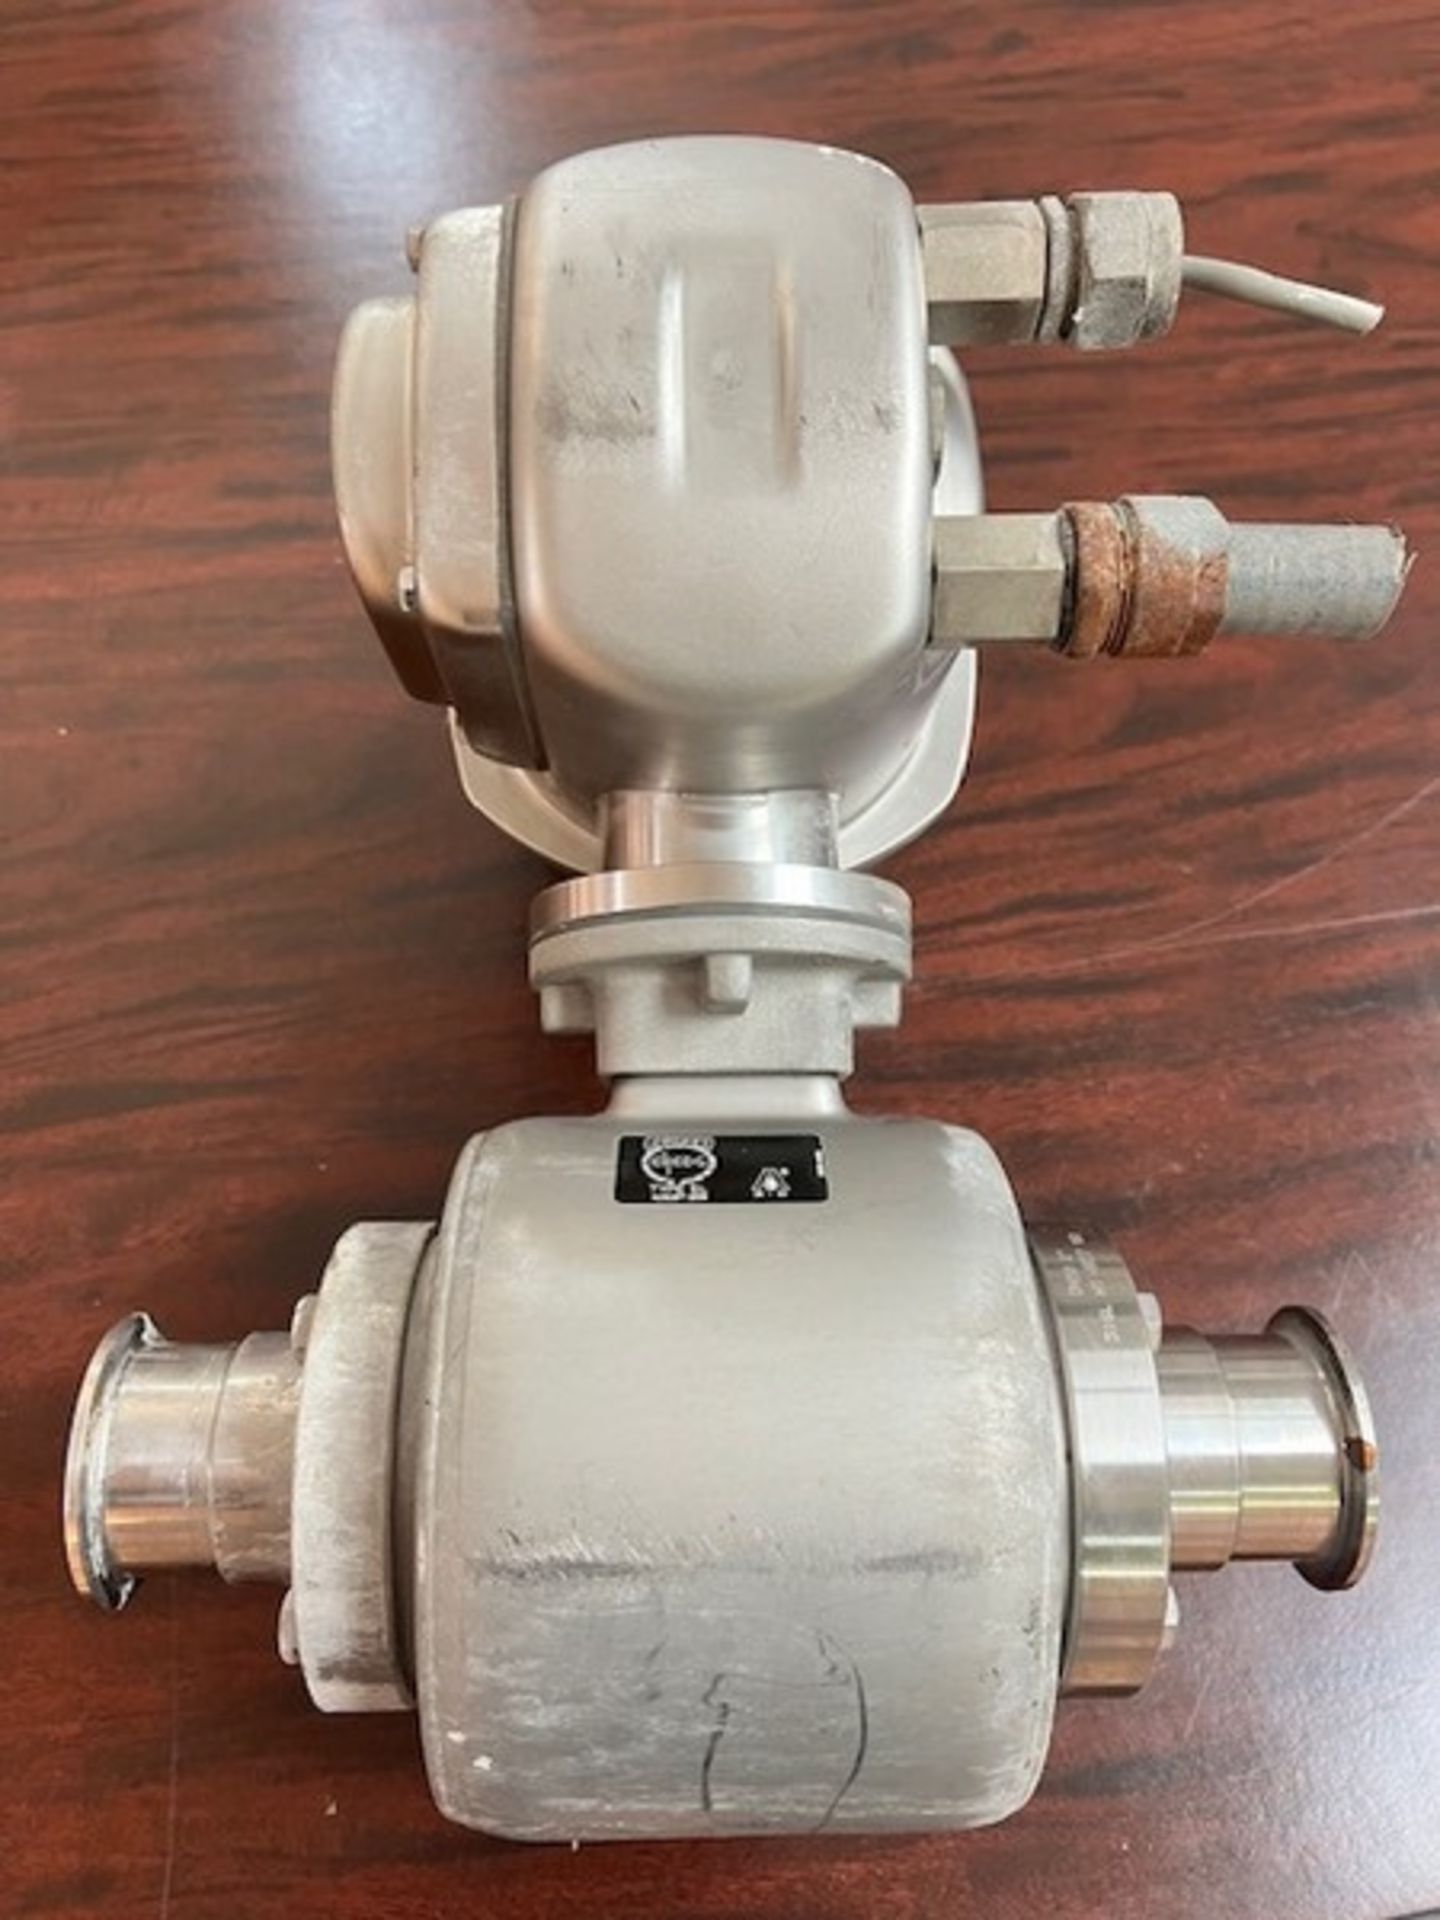 Endress+Hauser Pro Mag H Flow Tube with Endress+Hauser Pro Mag 53 Transmitter, S/N C4005916000 (Load - Image 4 of 4